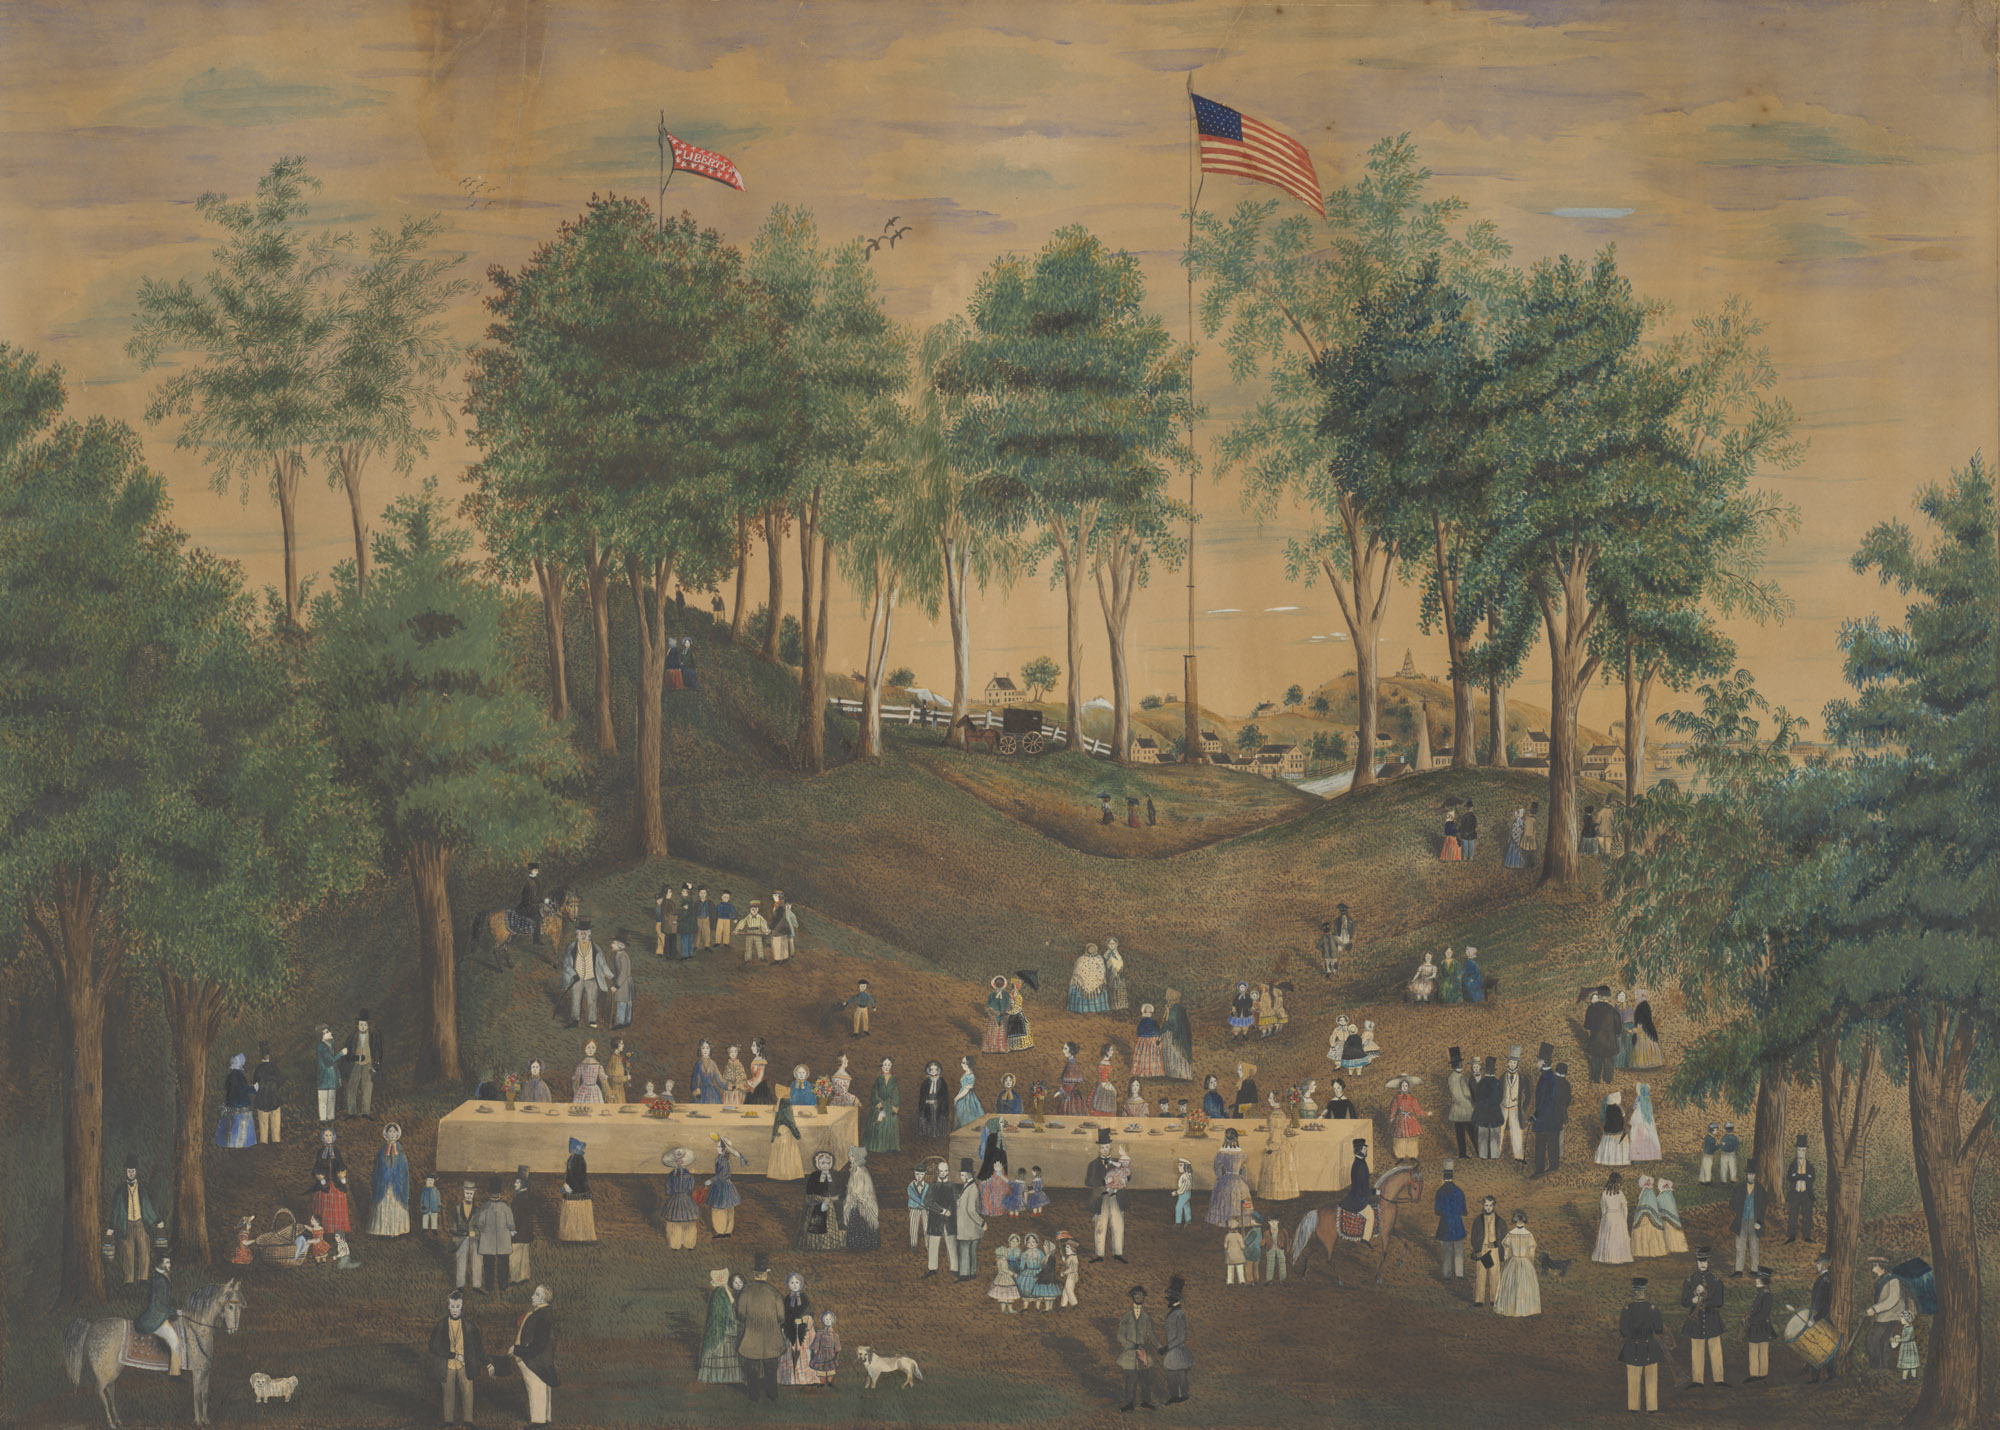 Susan Torrey Merritt, Antislavery Picnic at Weymouth Landing, Massachusetts, 1845, watercolor, gouache, and collage on paper, 25 15/16 x 35 15/16 inches (The Art Institute of Chicago)